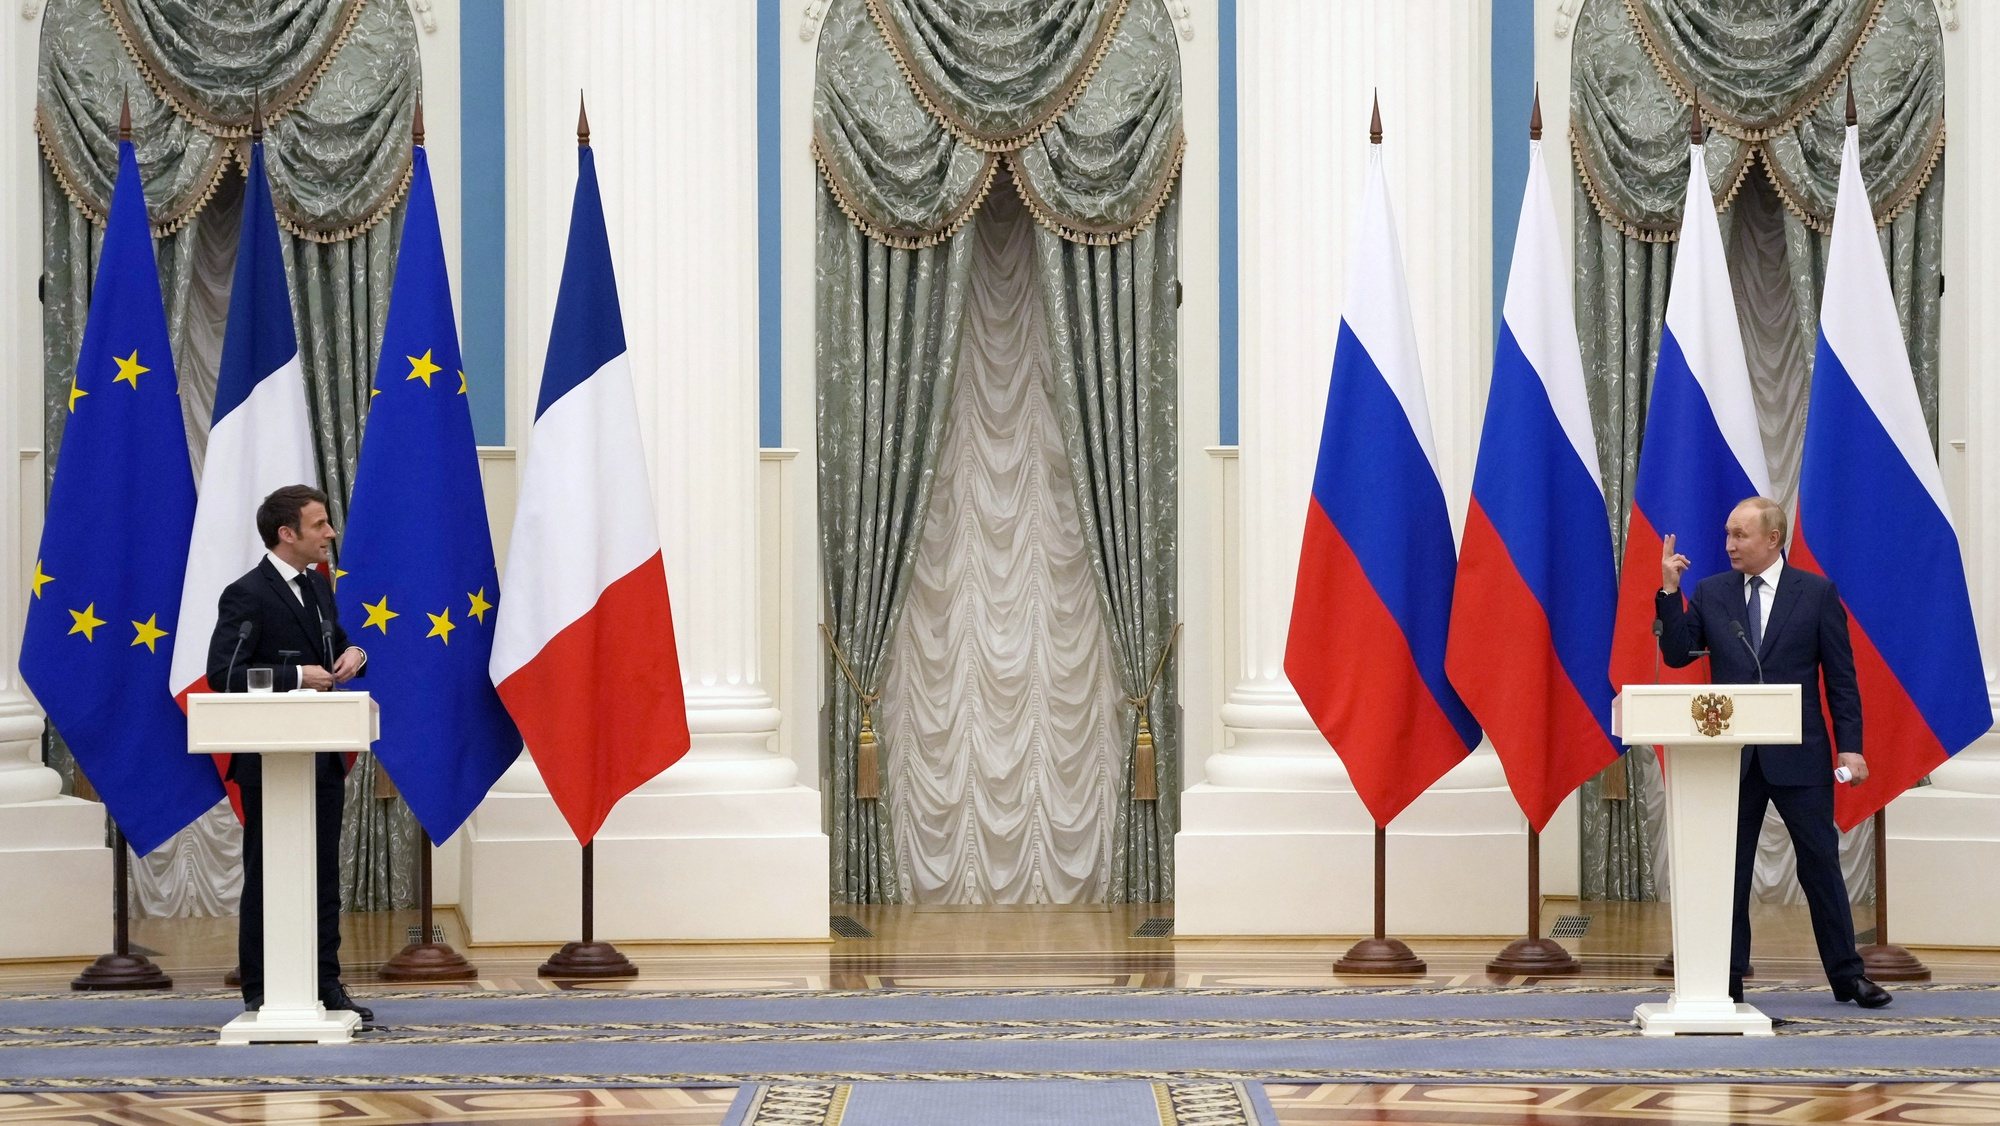 epa09736602 Russian President Vladimir Putin (R) gestures during a joint press conference with French President Emmanuel Macron after their talks in the Kremlin in Moscow, Russia, 07 February2022. International efforts to defuse the standoff over Ukraine intensified with French President Emmanuel Macron holding talks in Moscow and German Chancellor Olaf Scholz in Washington to coordinate policies as fears of a Russian invasion mount.  EPA/THIBAULT CAMUS / POOL MAXPPP OUT